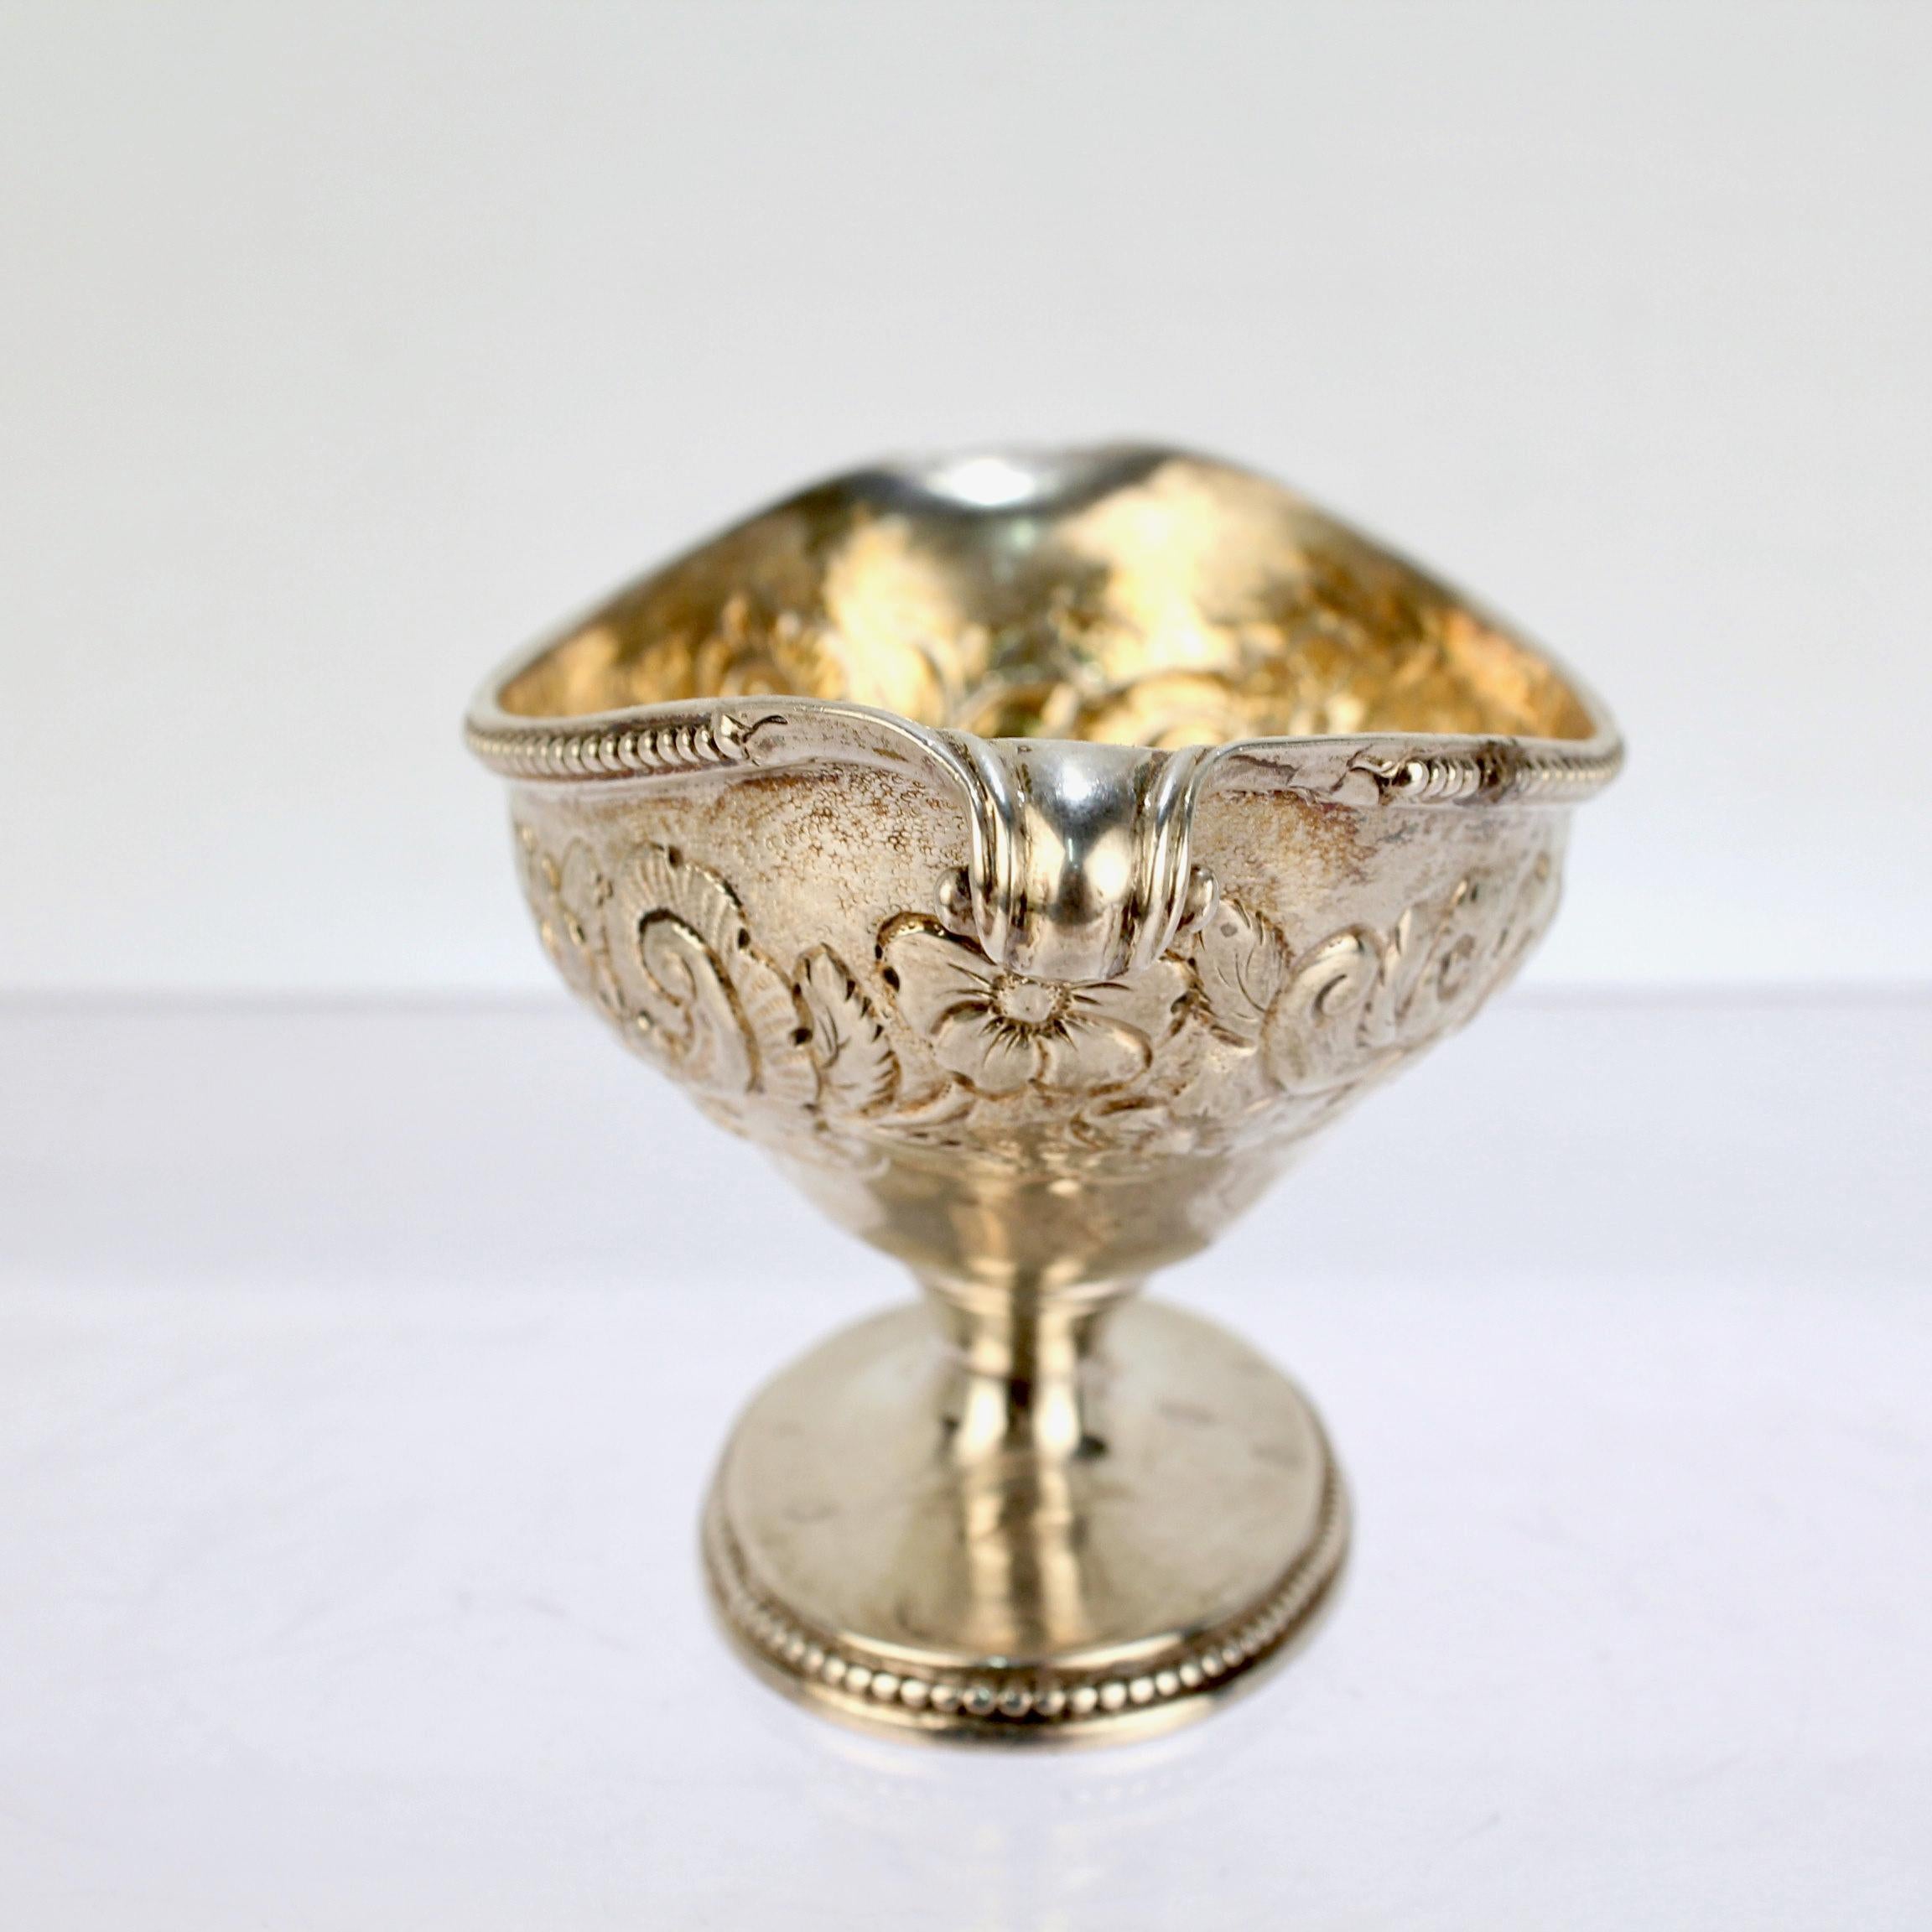 Antique 18th C George III Sterling Silver Salt Cellar by Robert Hennell I In Good Condition For Sale In Philadelphia, PA